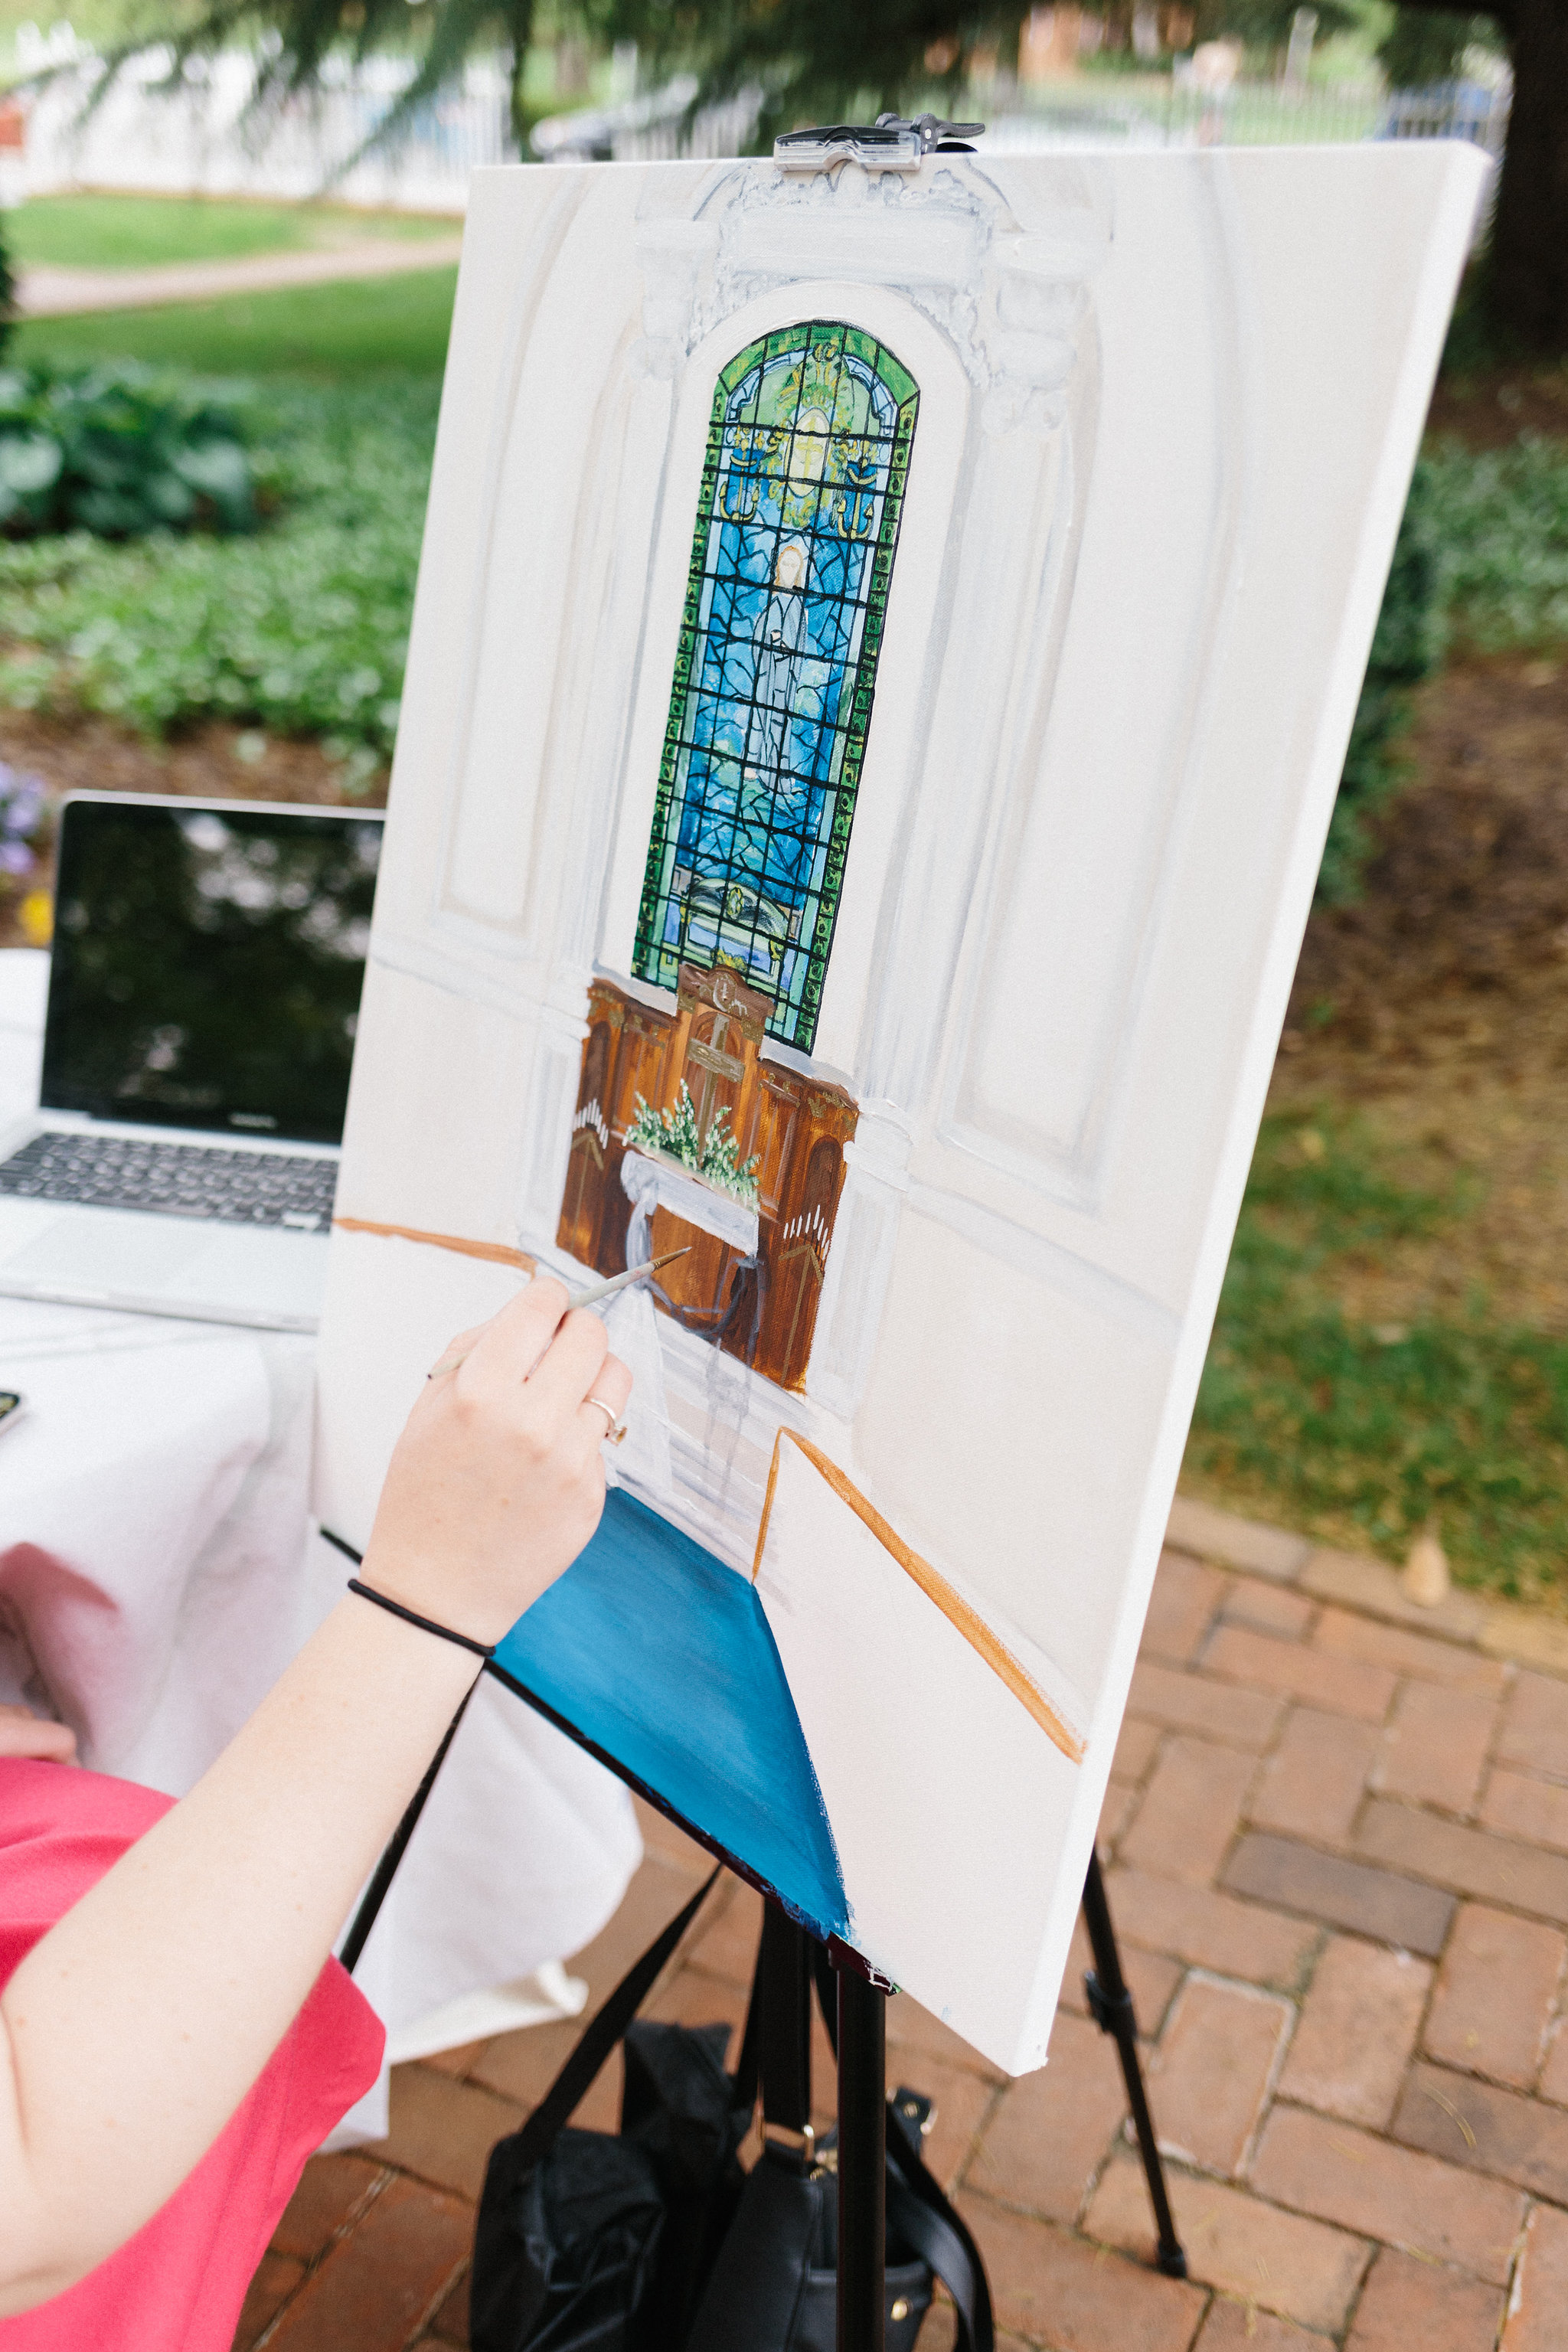 Live painter Brittany Branson painting a likeness of the bride and groom at a wedding in Annapolis